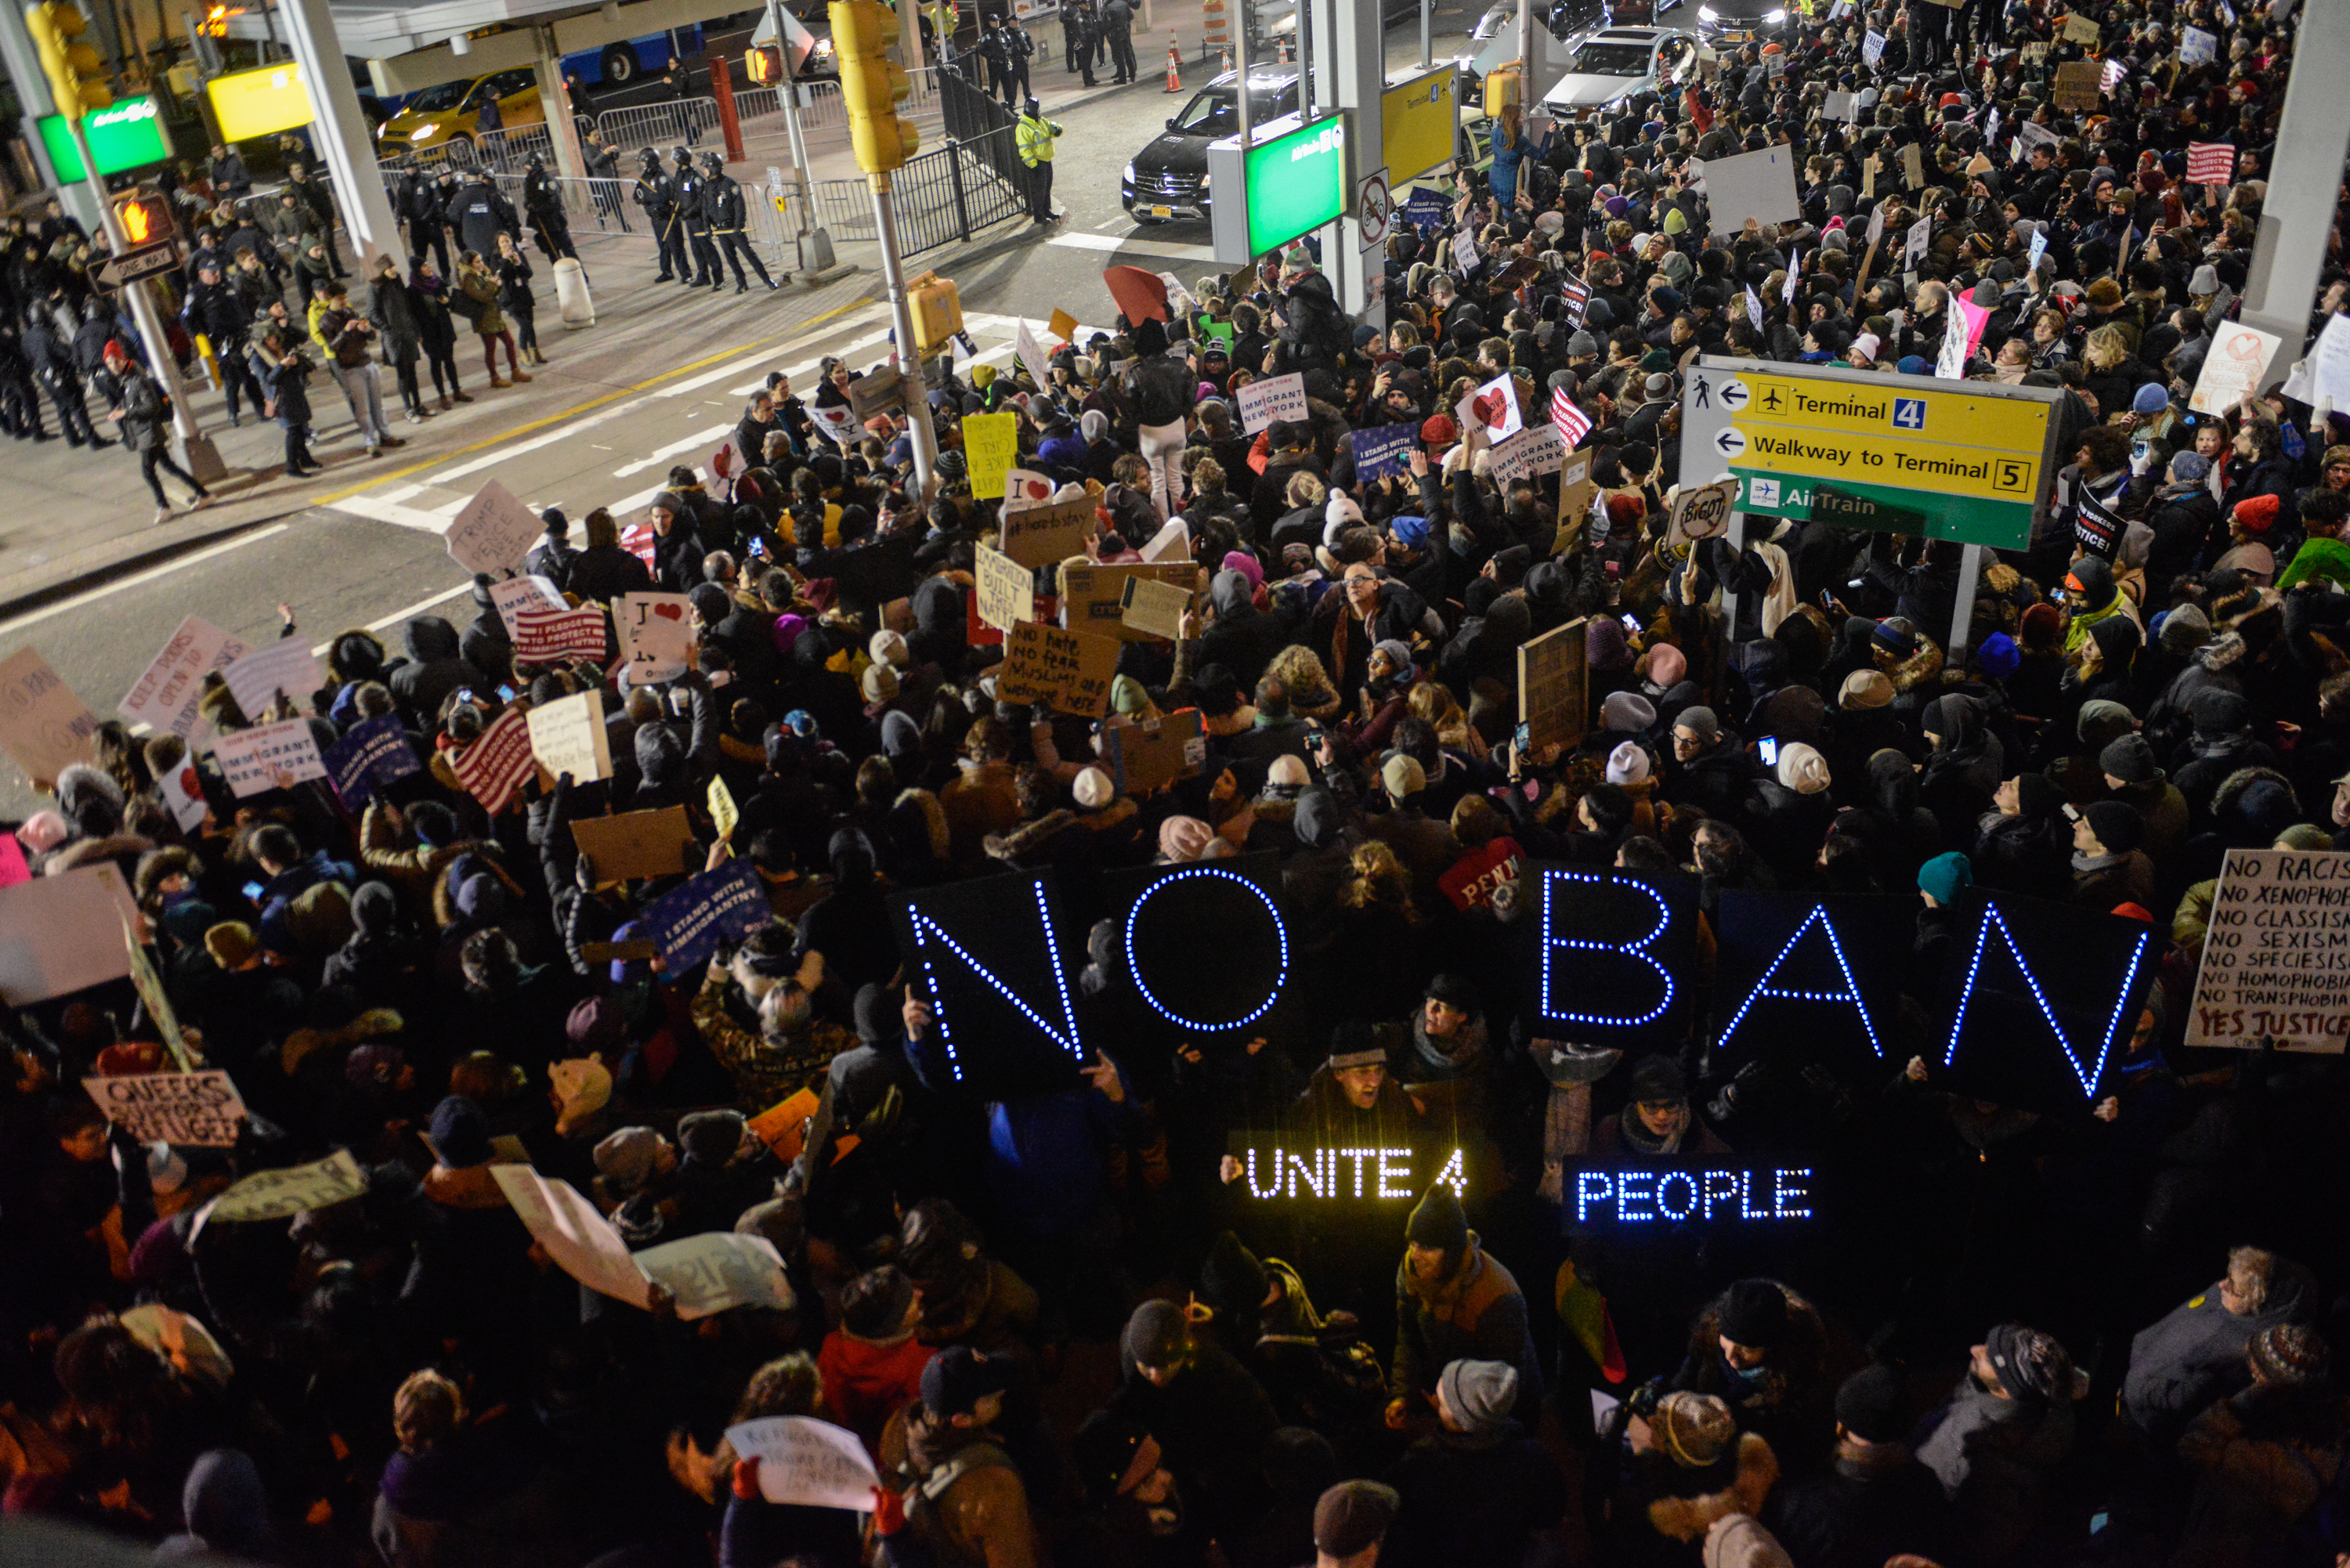 Protestors rally  during a demonstration against the immigration ban at John F. Kennedy International Airport on January 28, 2017 in New York City. (Stephanie Keith—Getty Images)